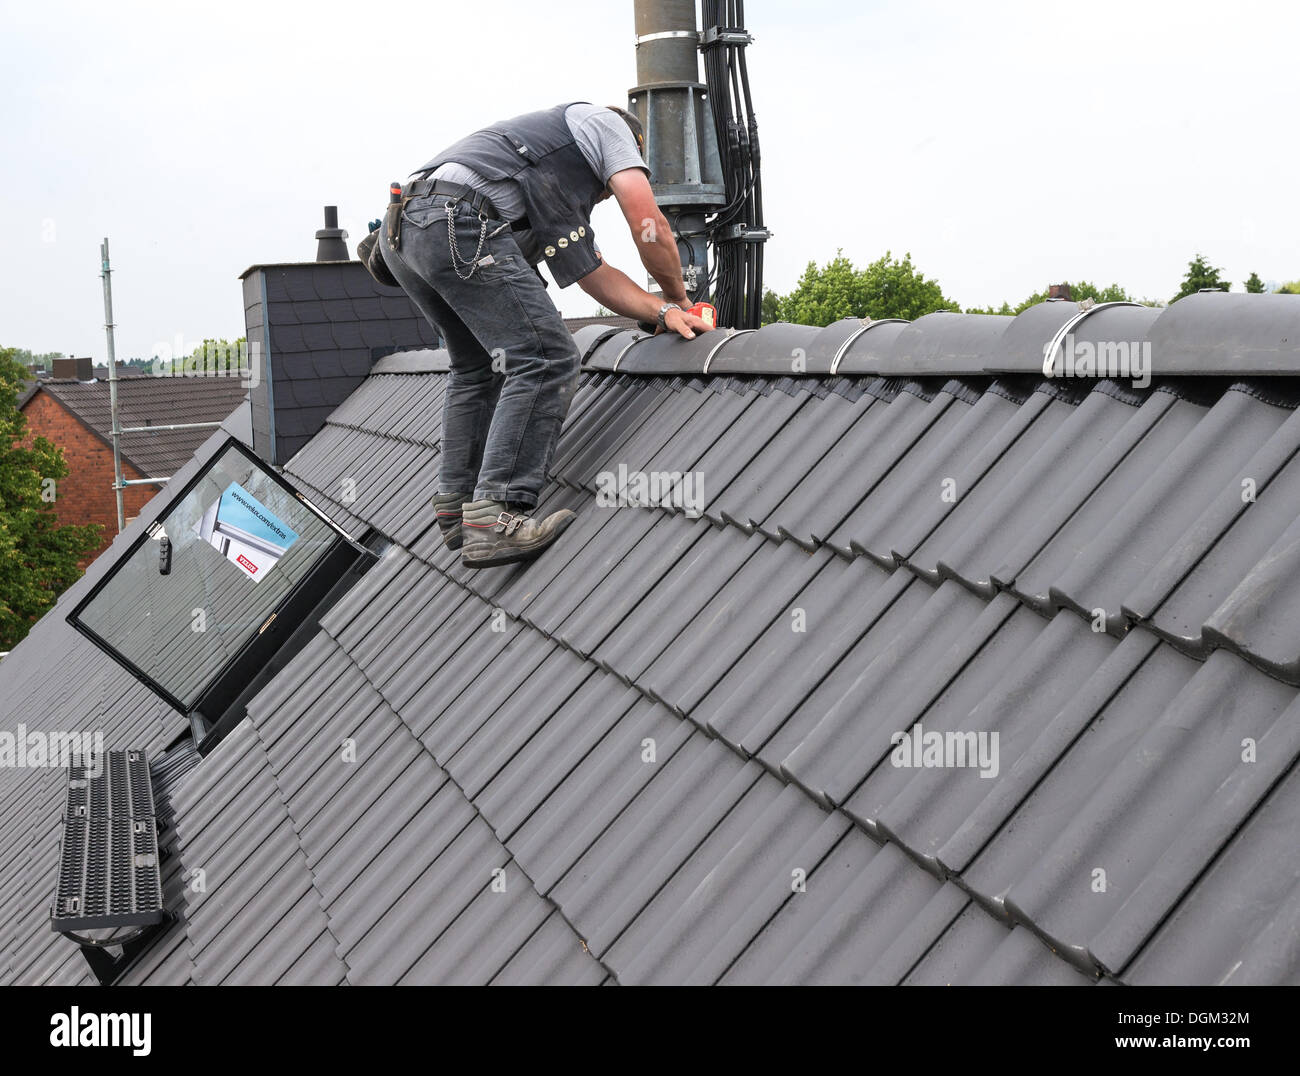 A roofer climbs without protection on a roof. Stock Photo